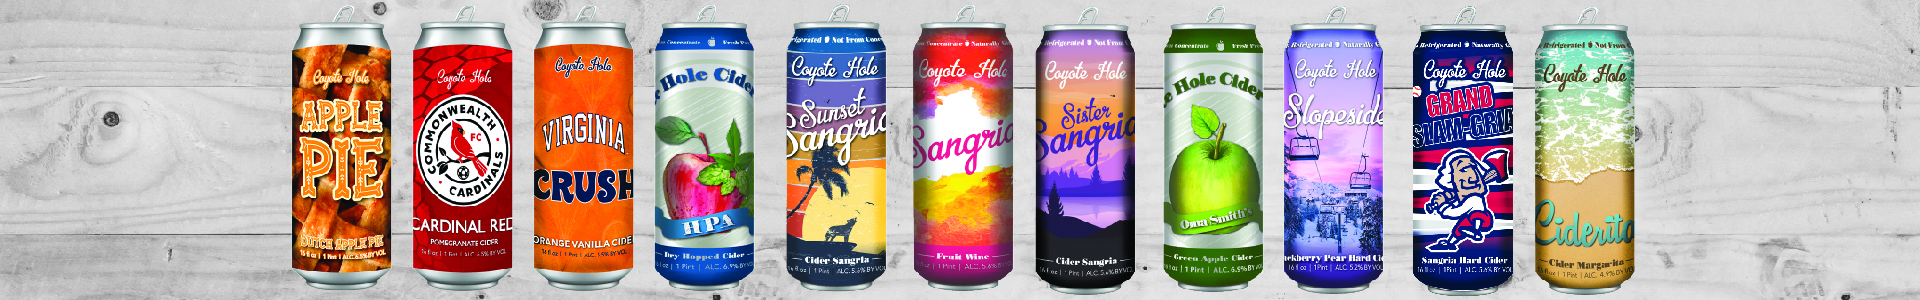 Coyote Hole Cider Cans